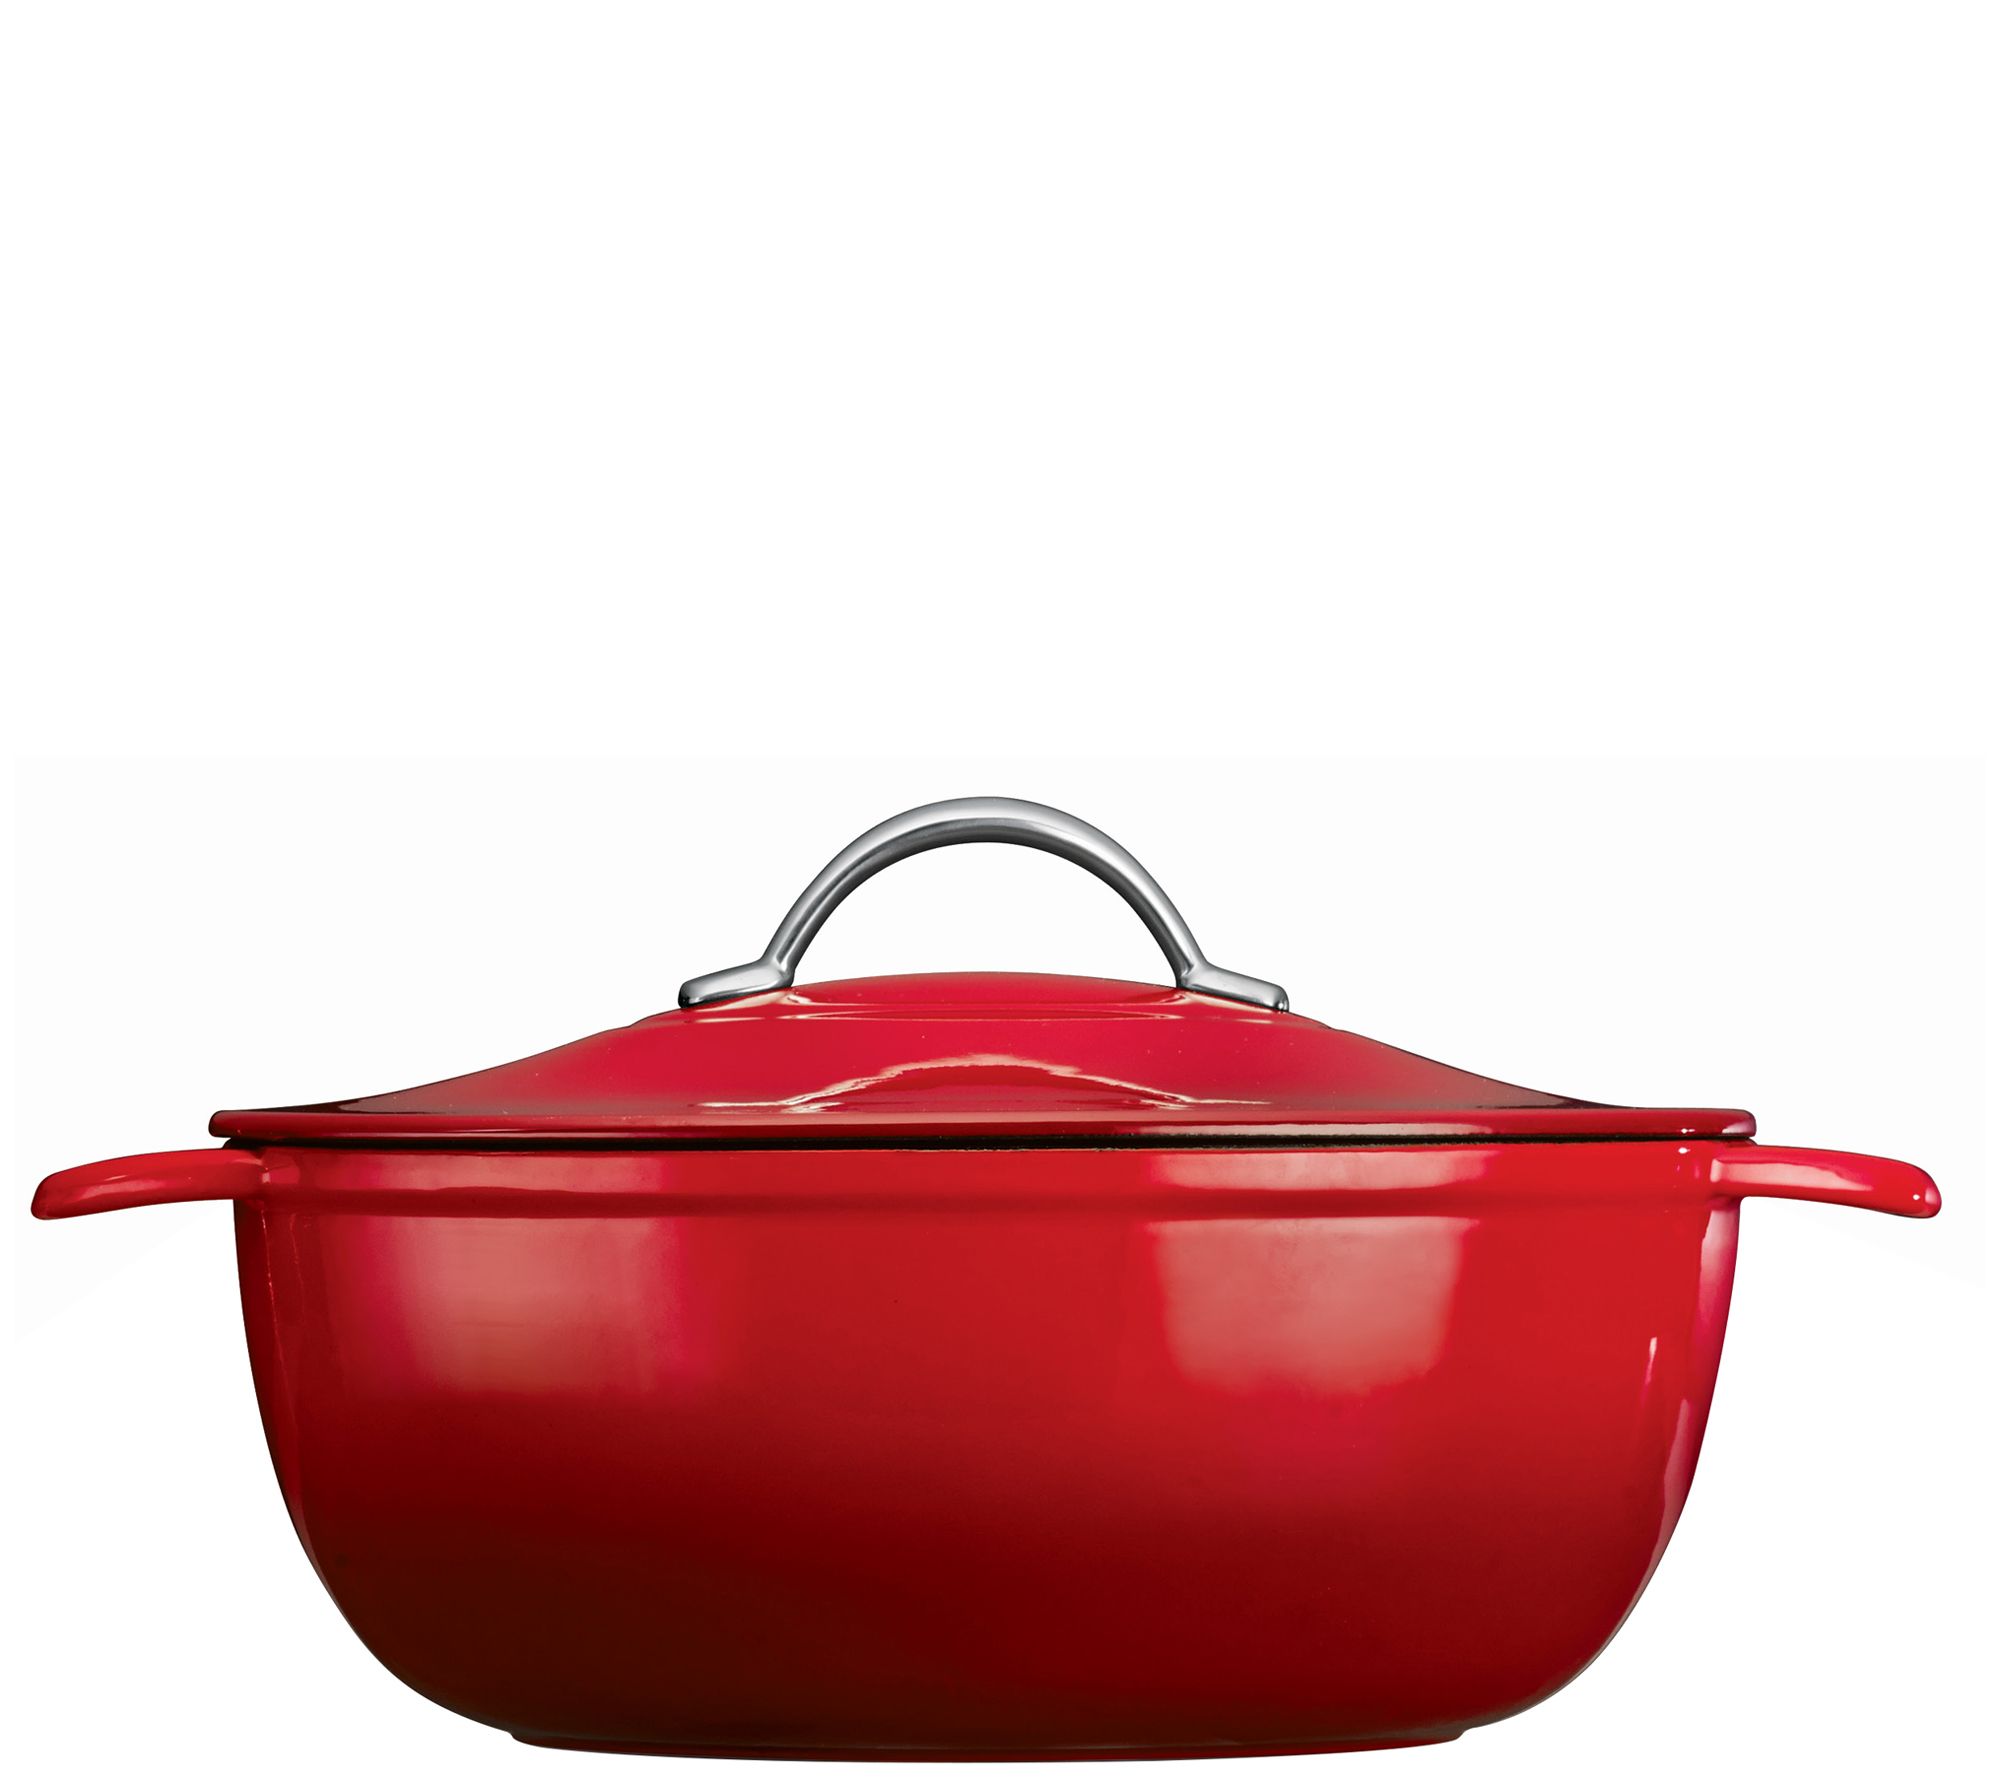 Tramontina Enameled Cast Iron Dutch Oven, 2-Pack in Red